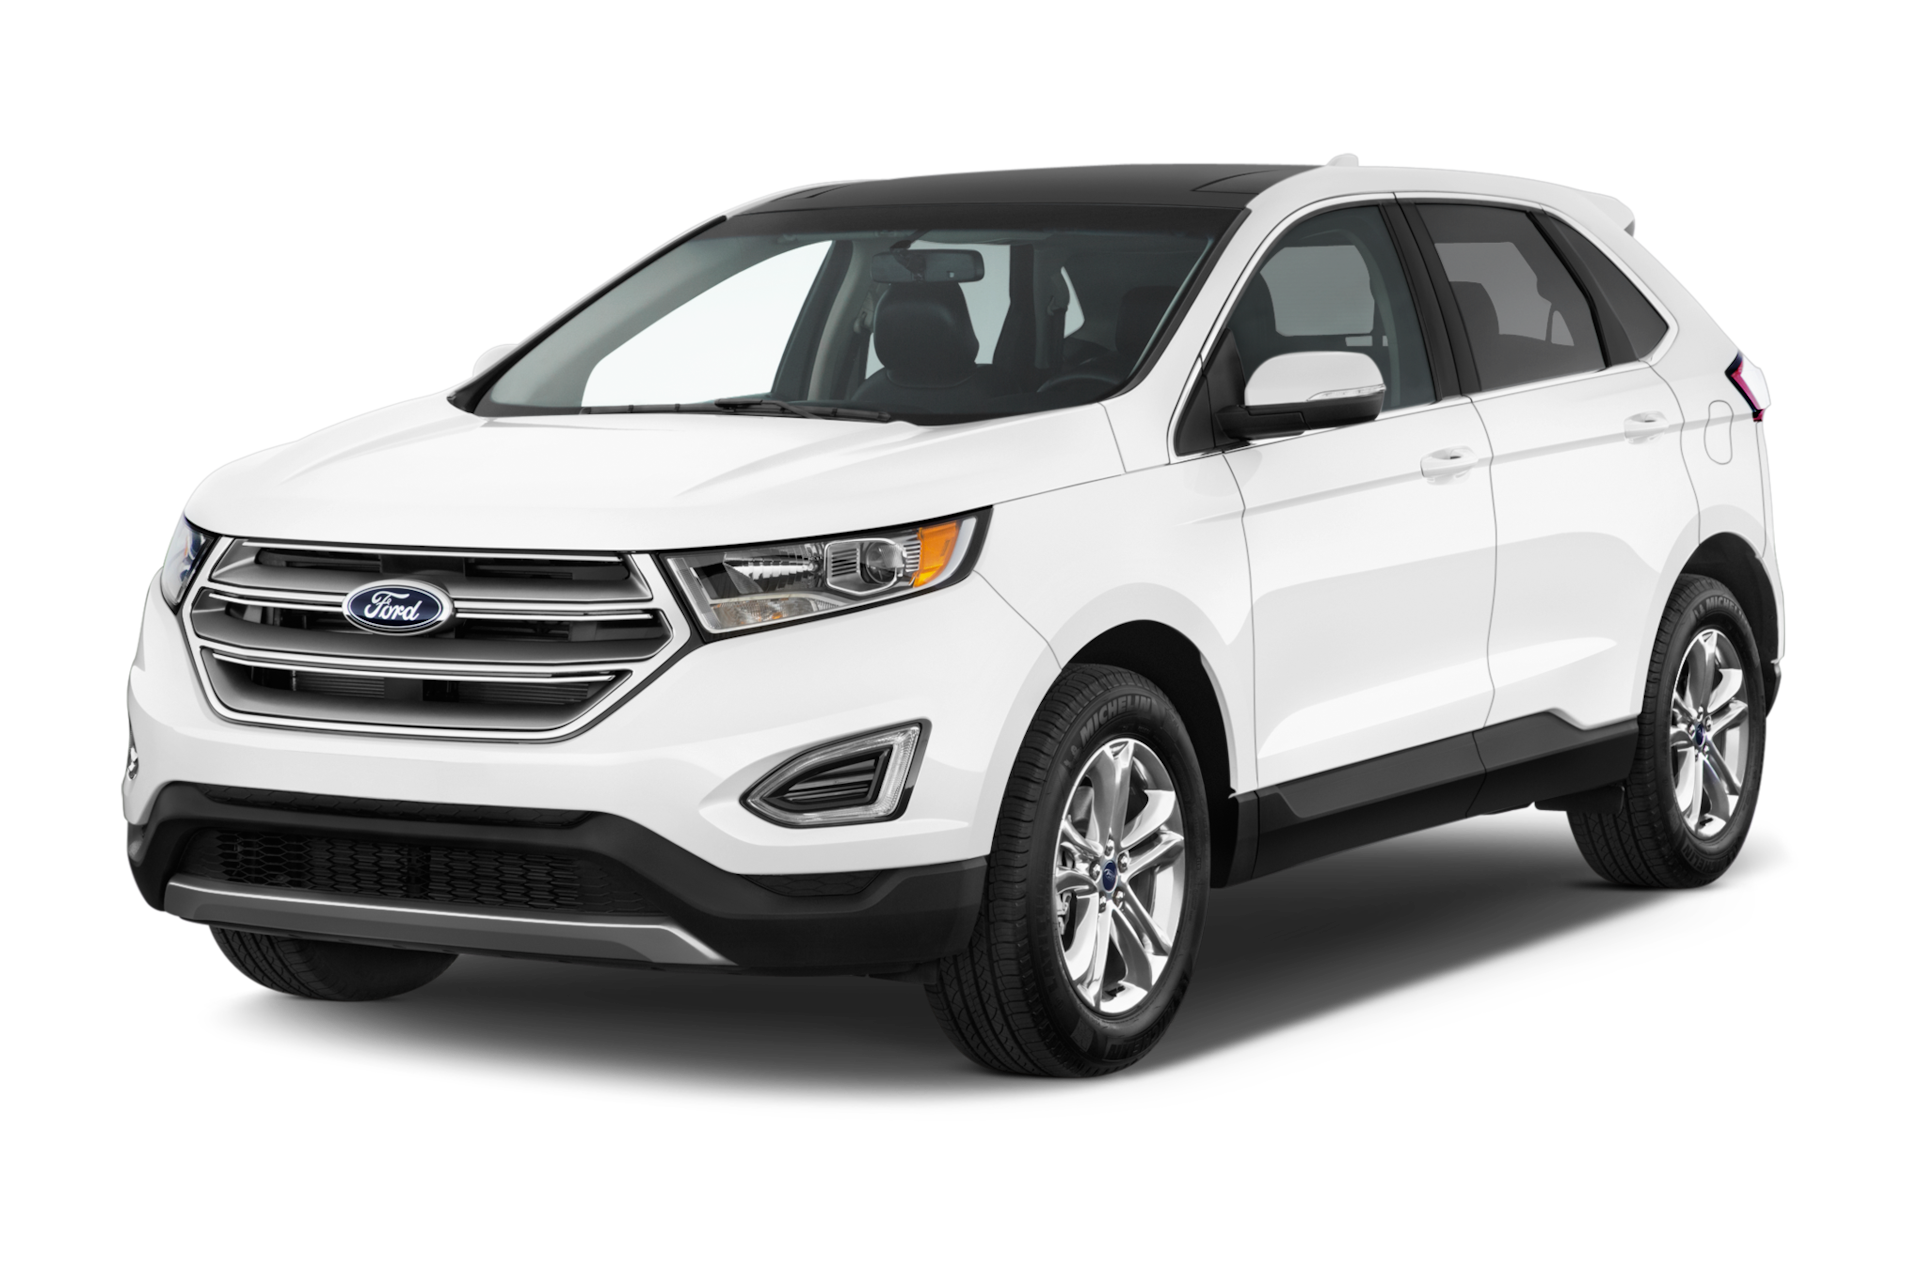 2017 Ford Edge Prices, Reviews, and Photos - MotorTrend